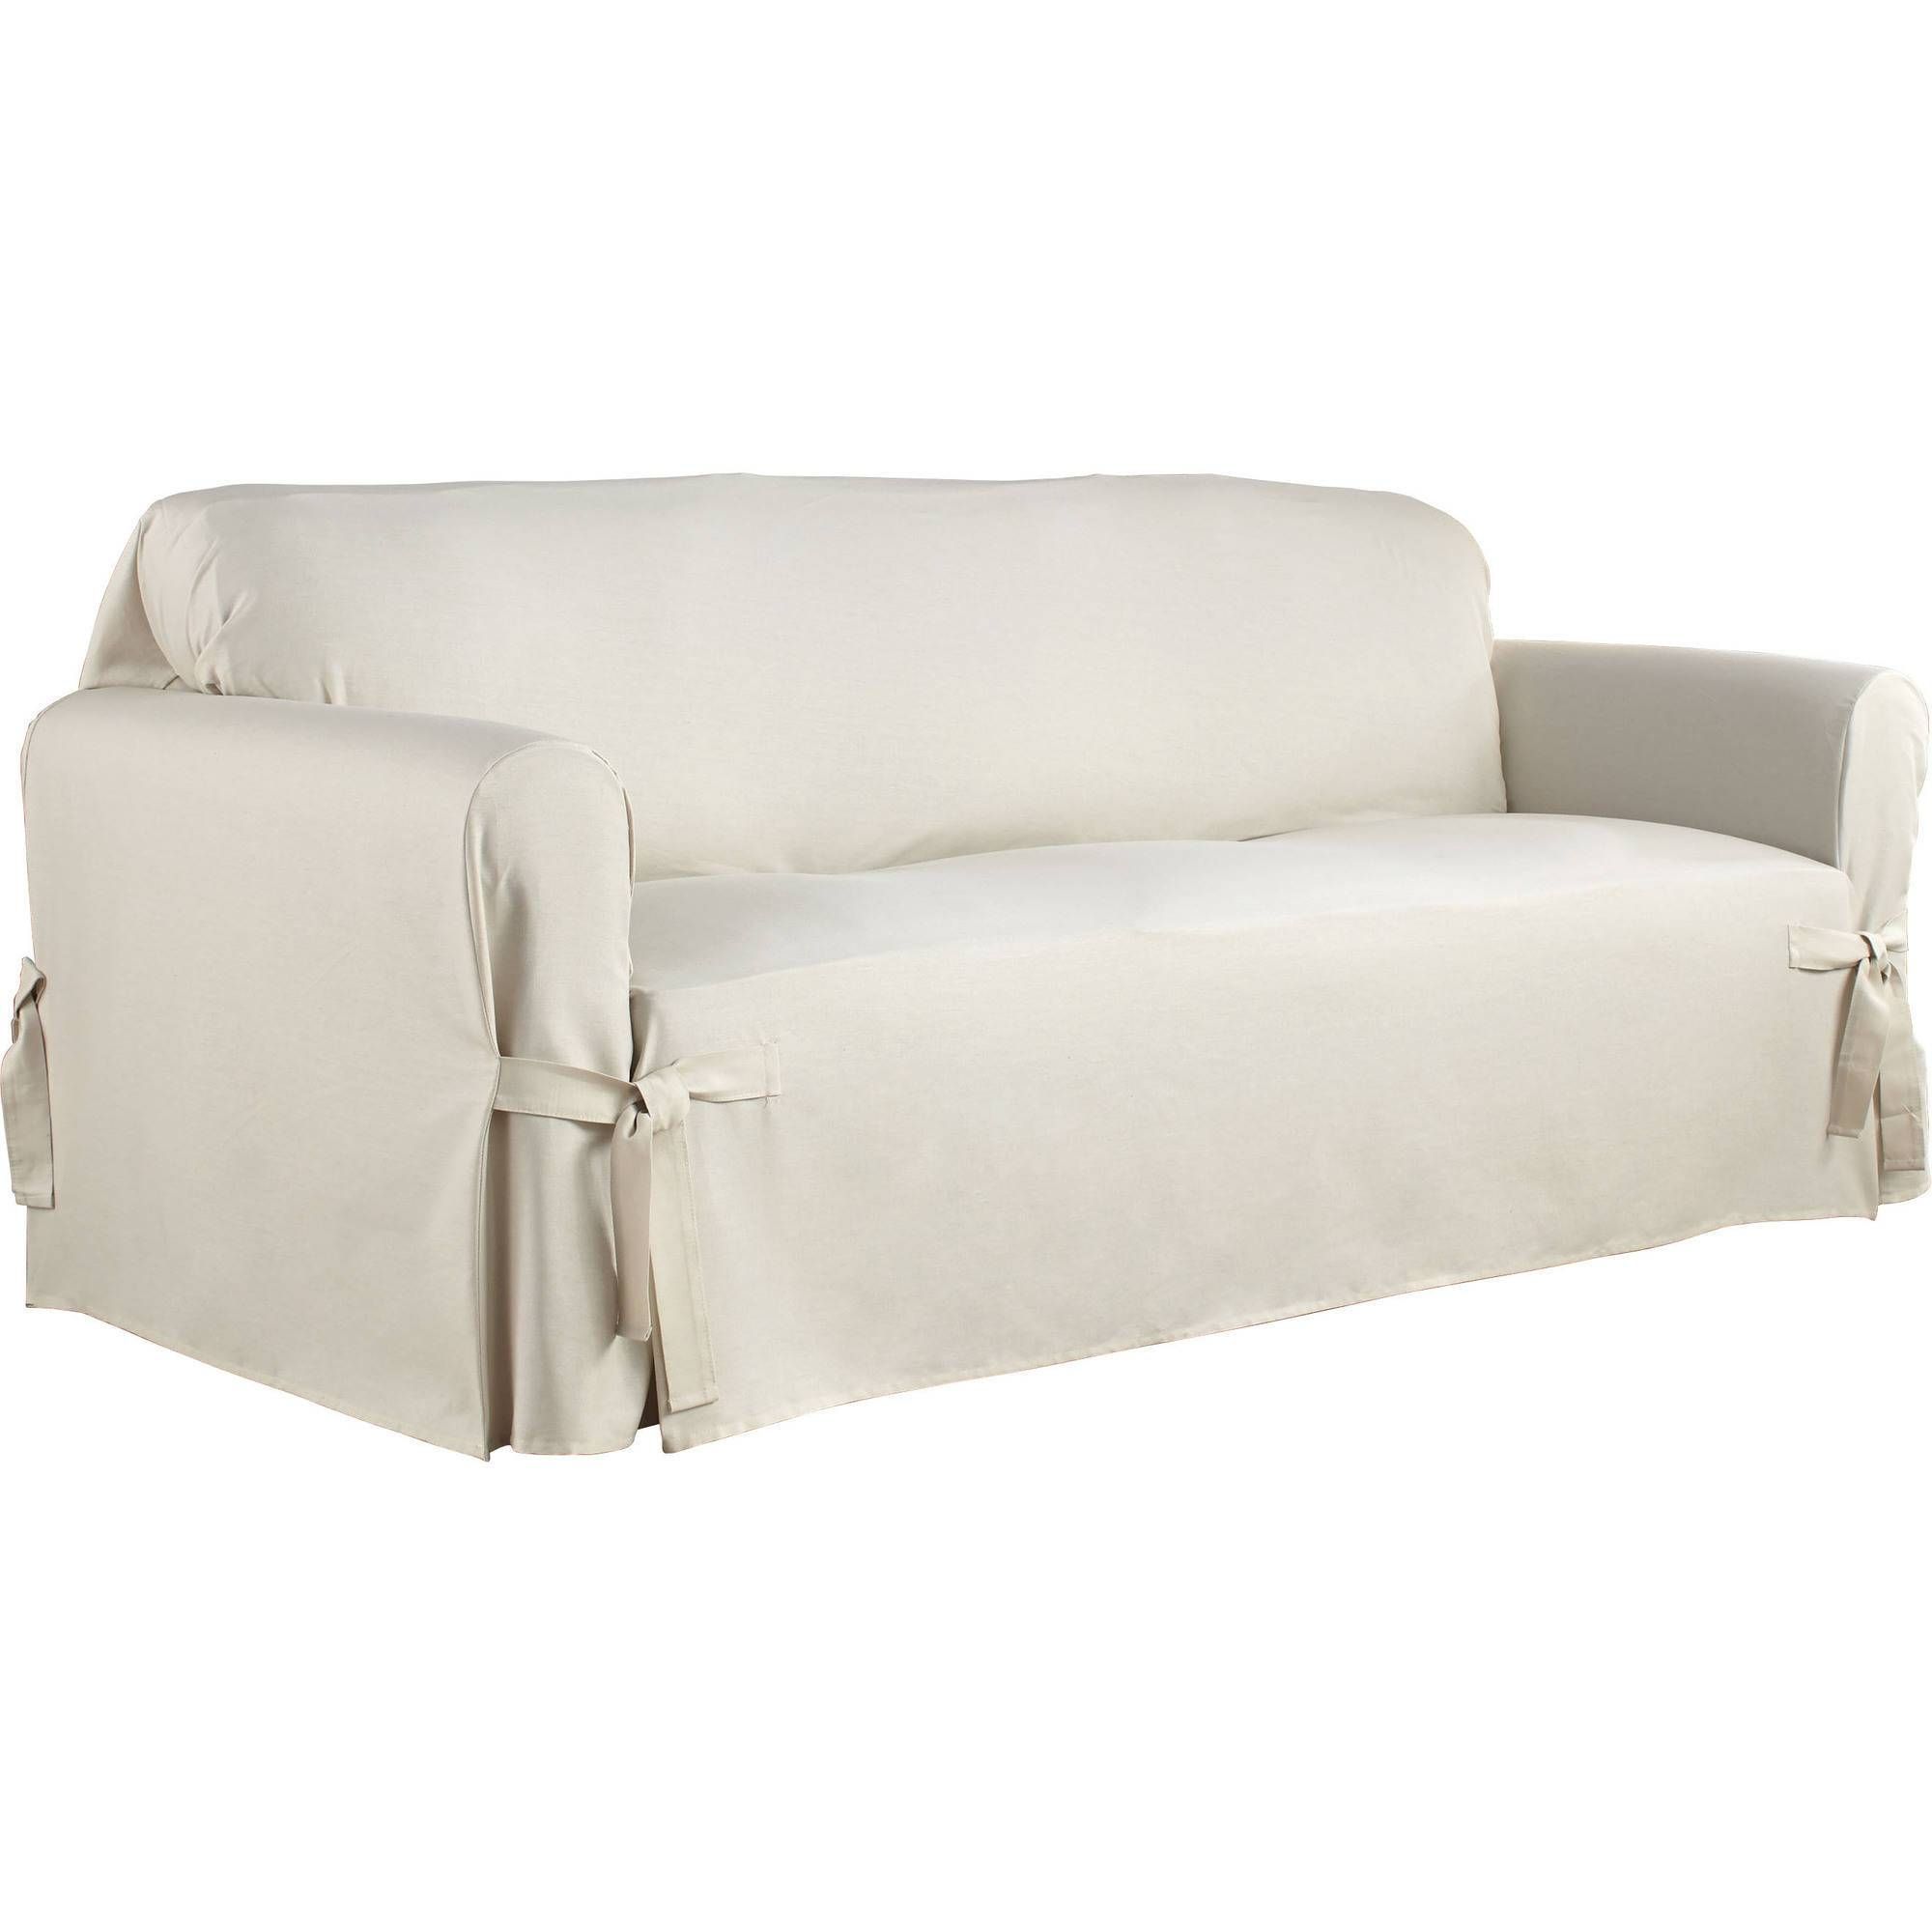 Serta Relaxed Fit Duck Furniture Slipcover, Sofa 1 Piece Box Intended For Walmart Slipcovers For Sofas (View 23 of 30)